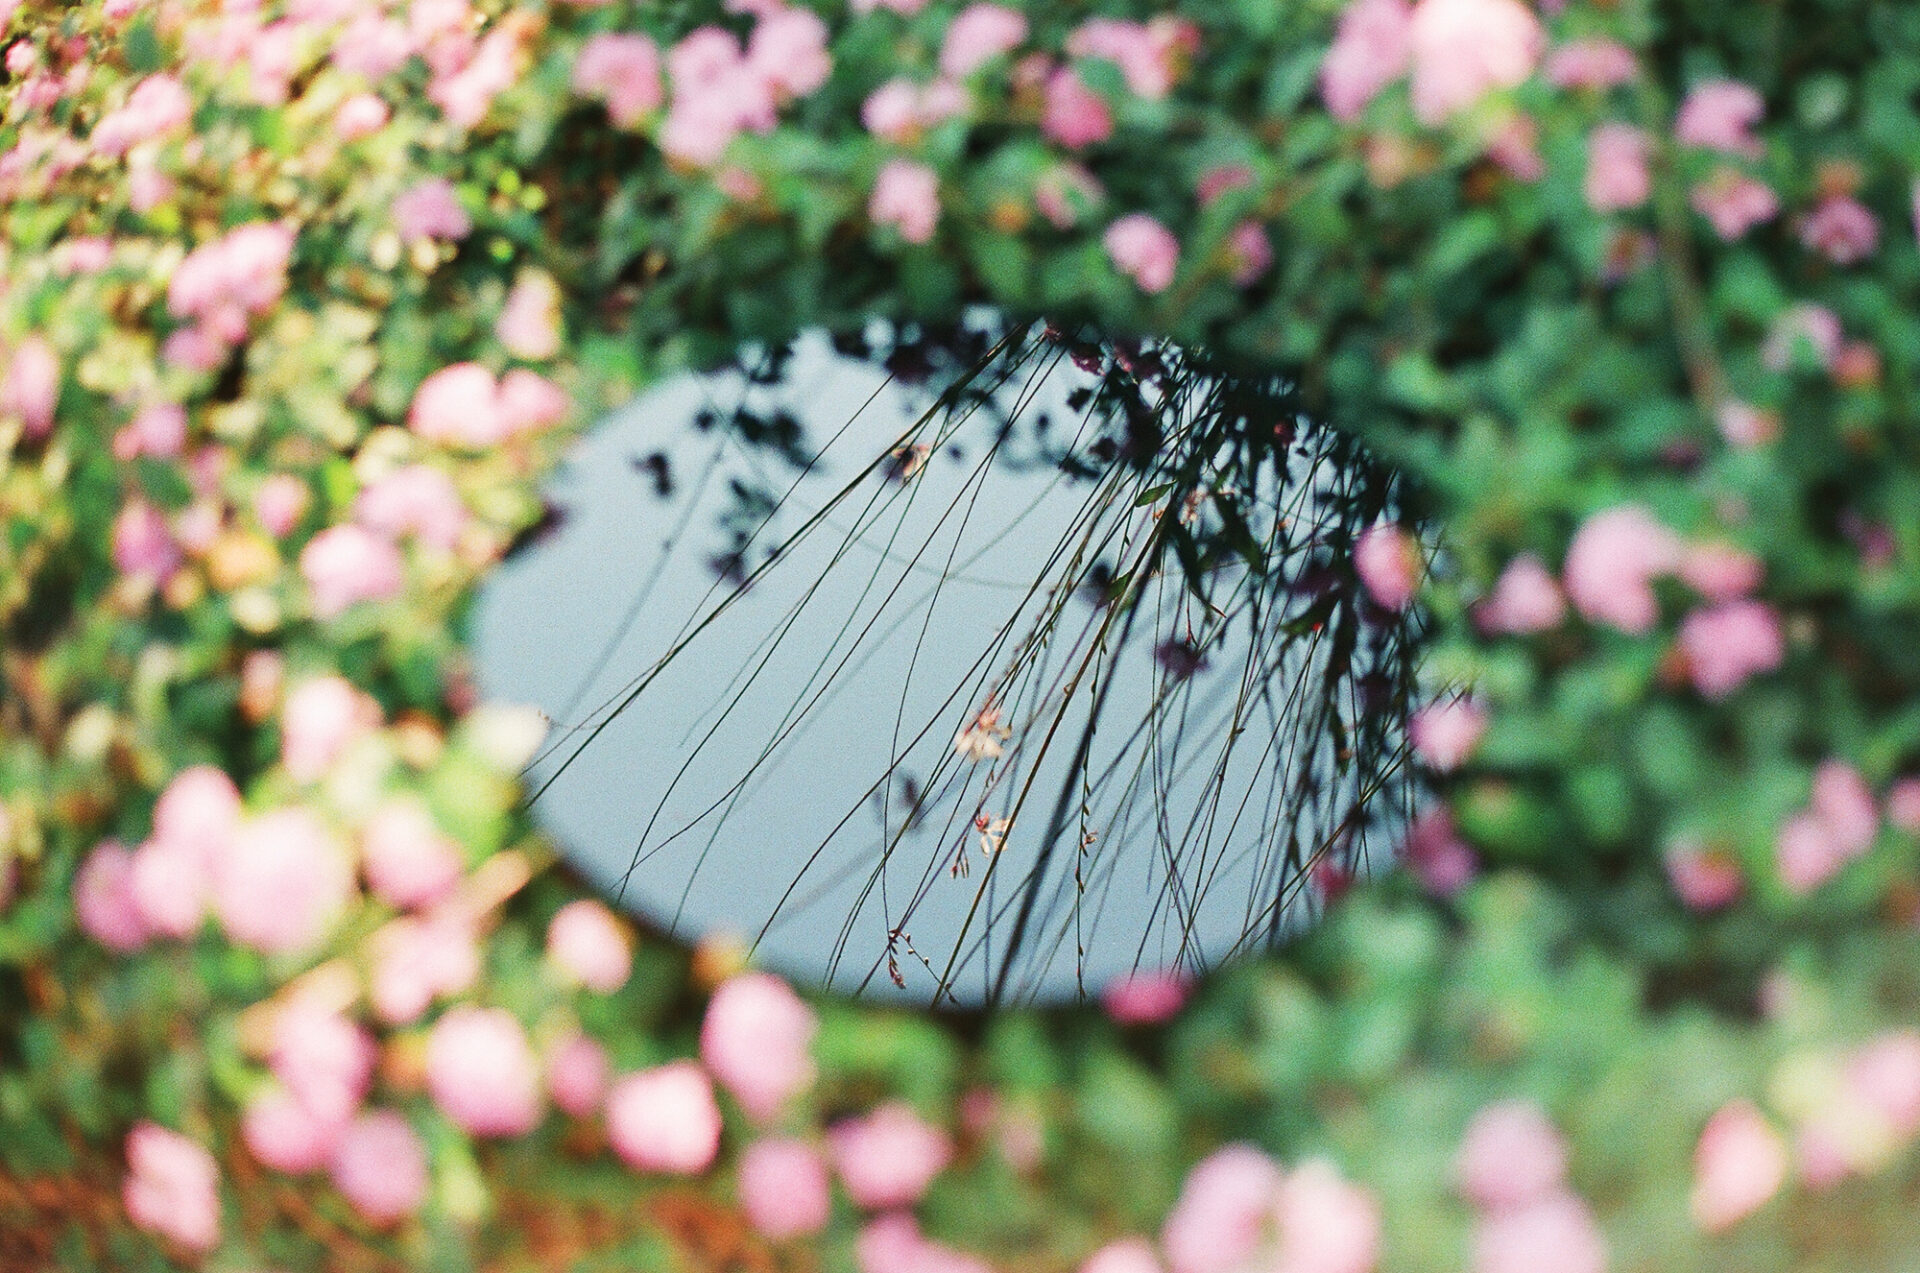 Hard Questions By Film Photographer Niko Sonnberger. This image depicts a round mirror in a garden